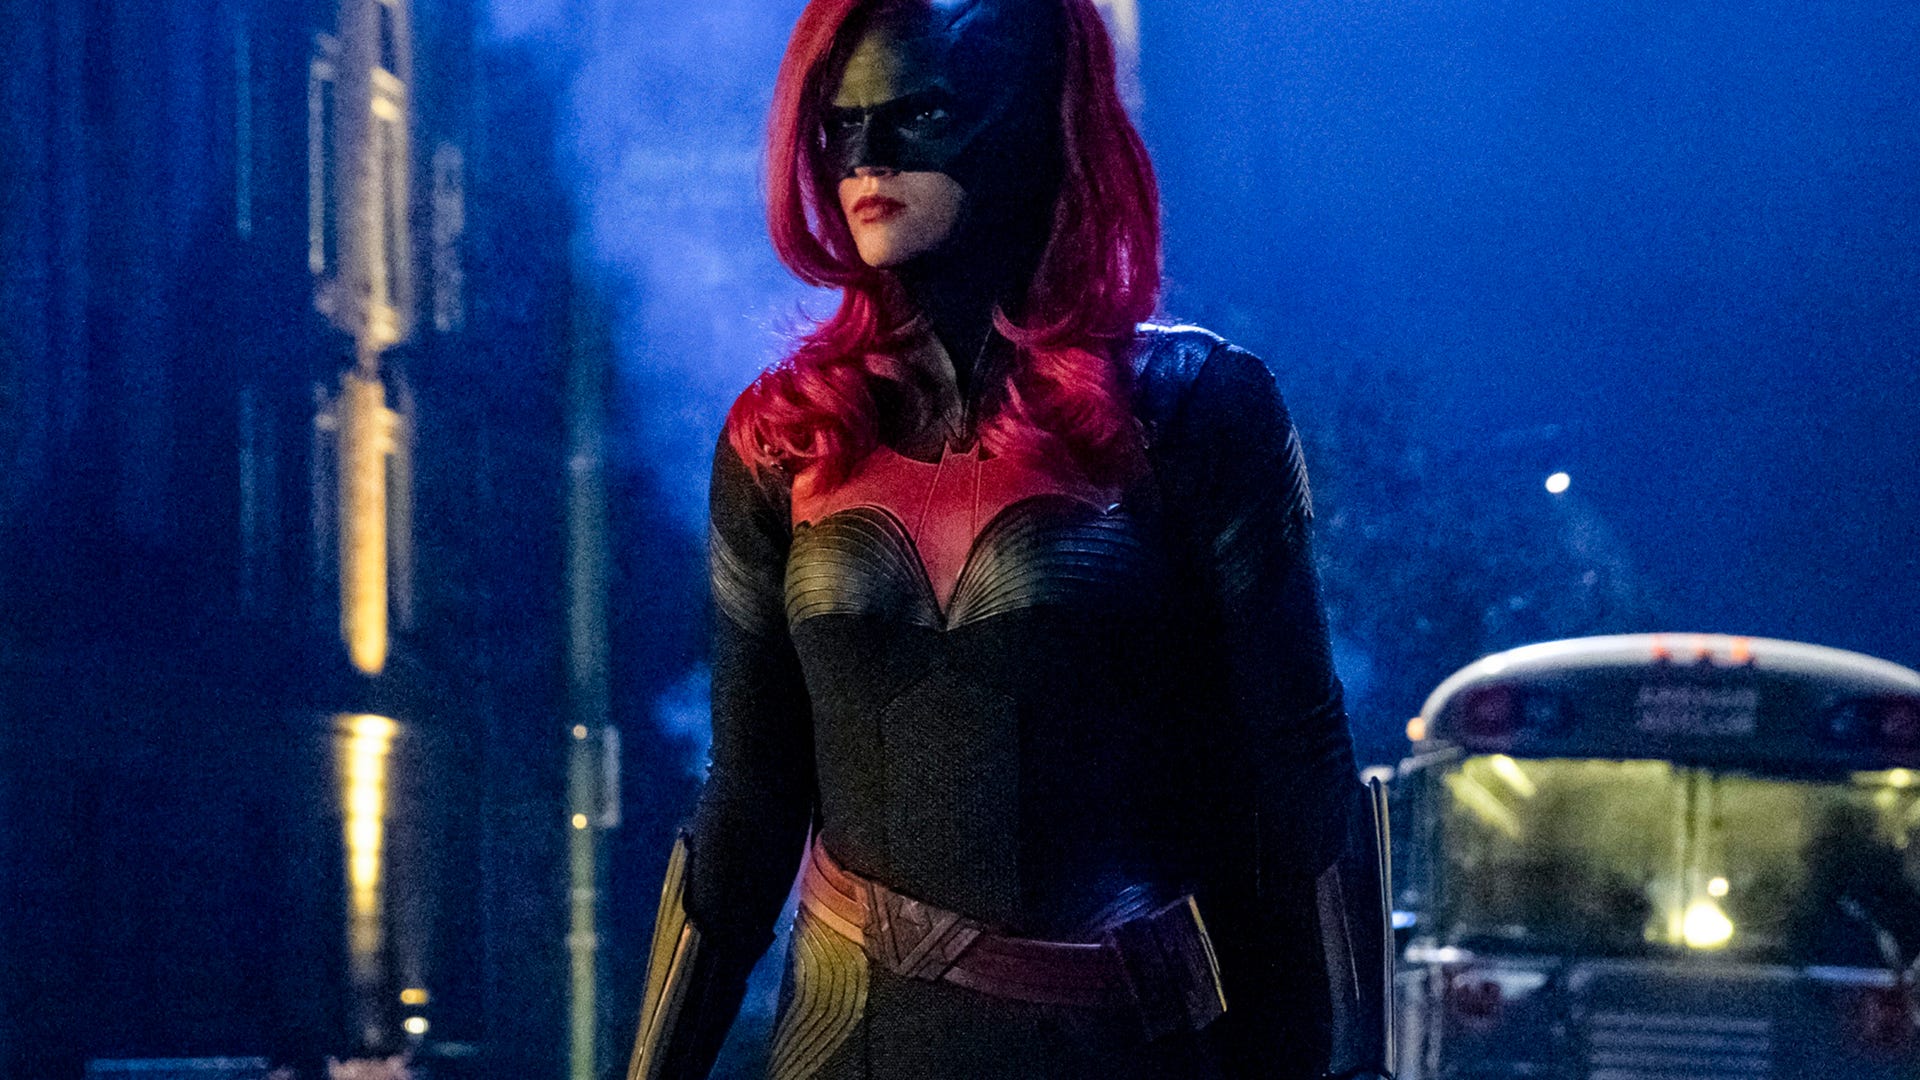 Click on Batwoman to see everything we know about her series so far!